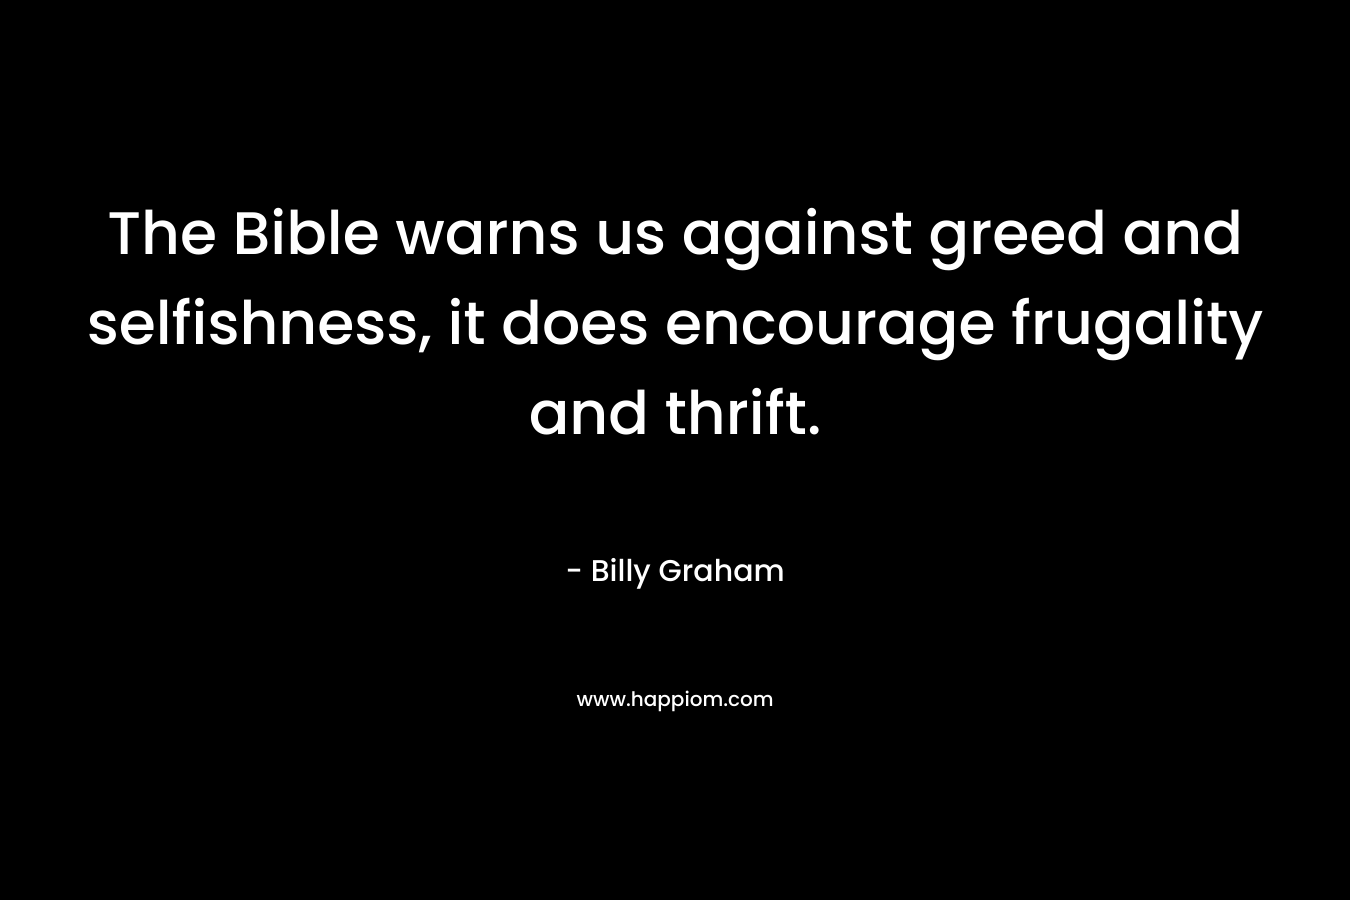 The Bible warns us against greed and selfishness, it does encourage frugality and thrift.